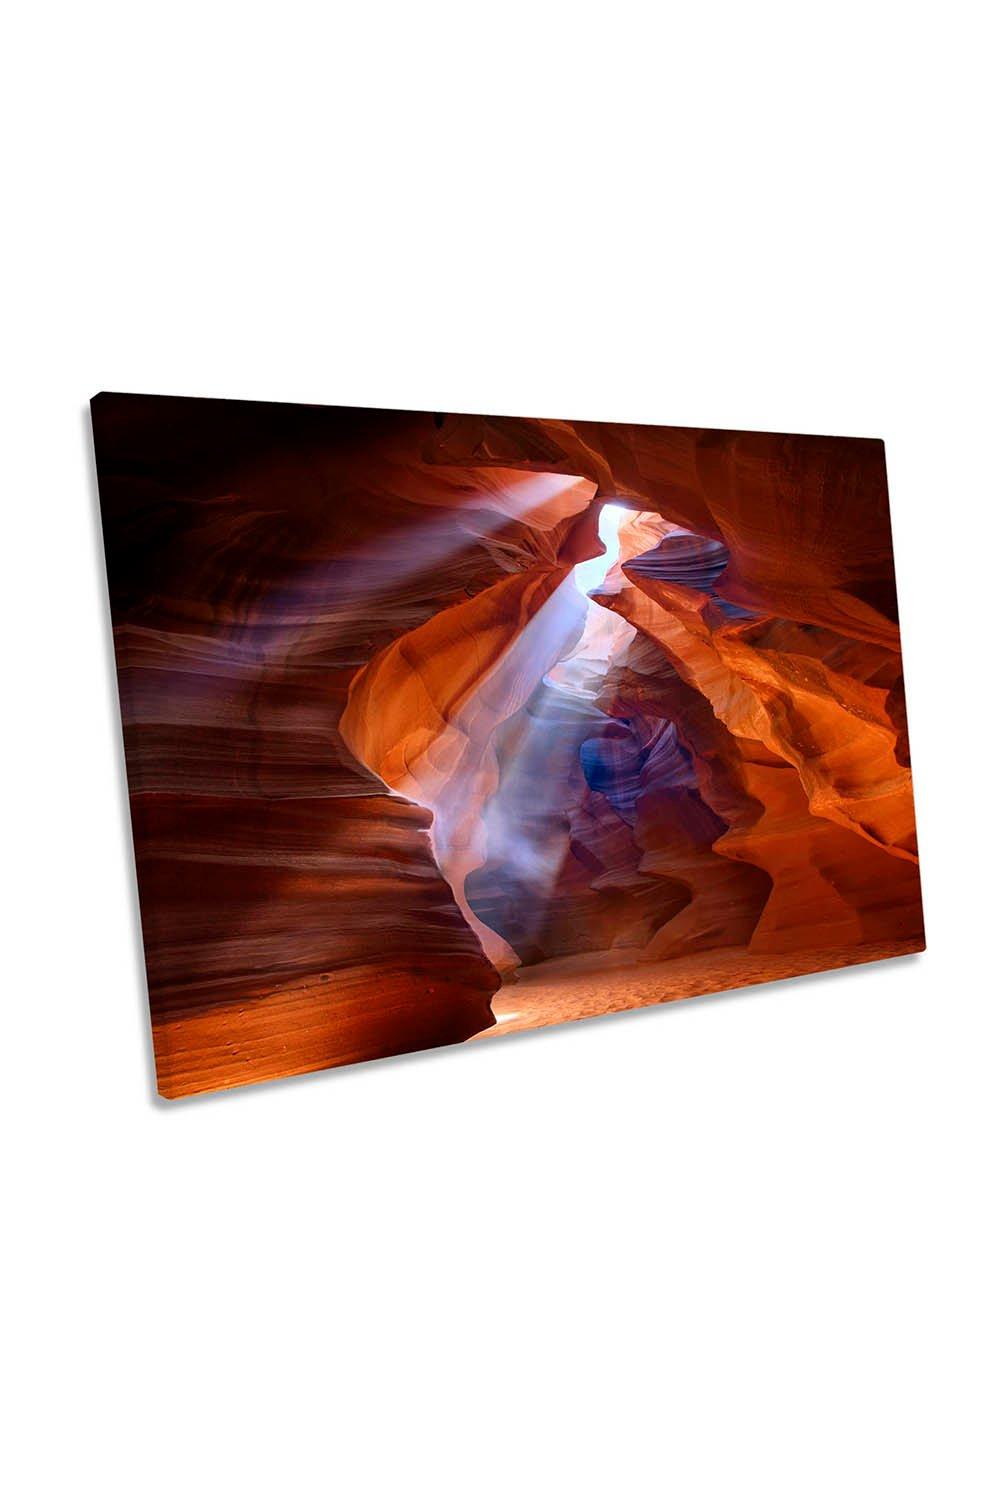 Antelope Canyon Sun Rays Canvas Wall Art Picture Print